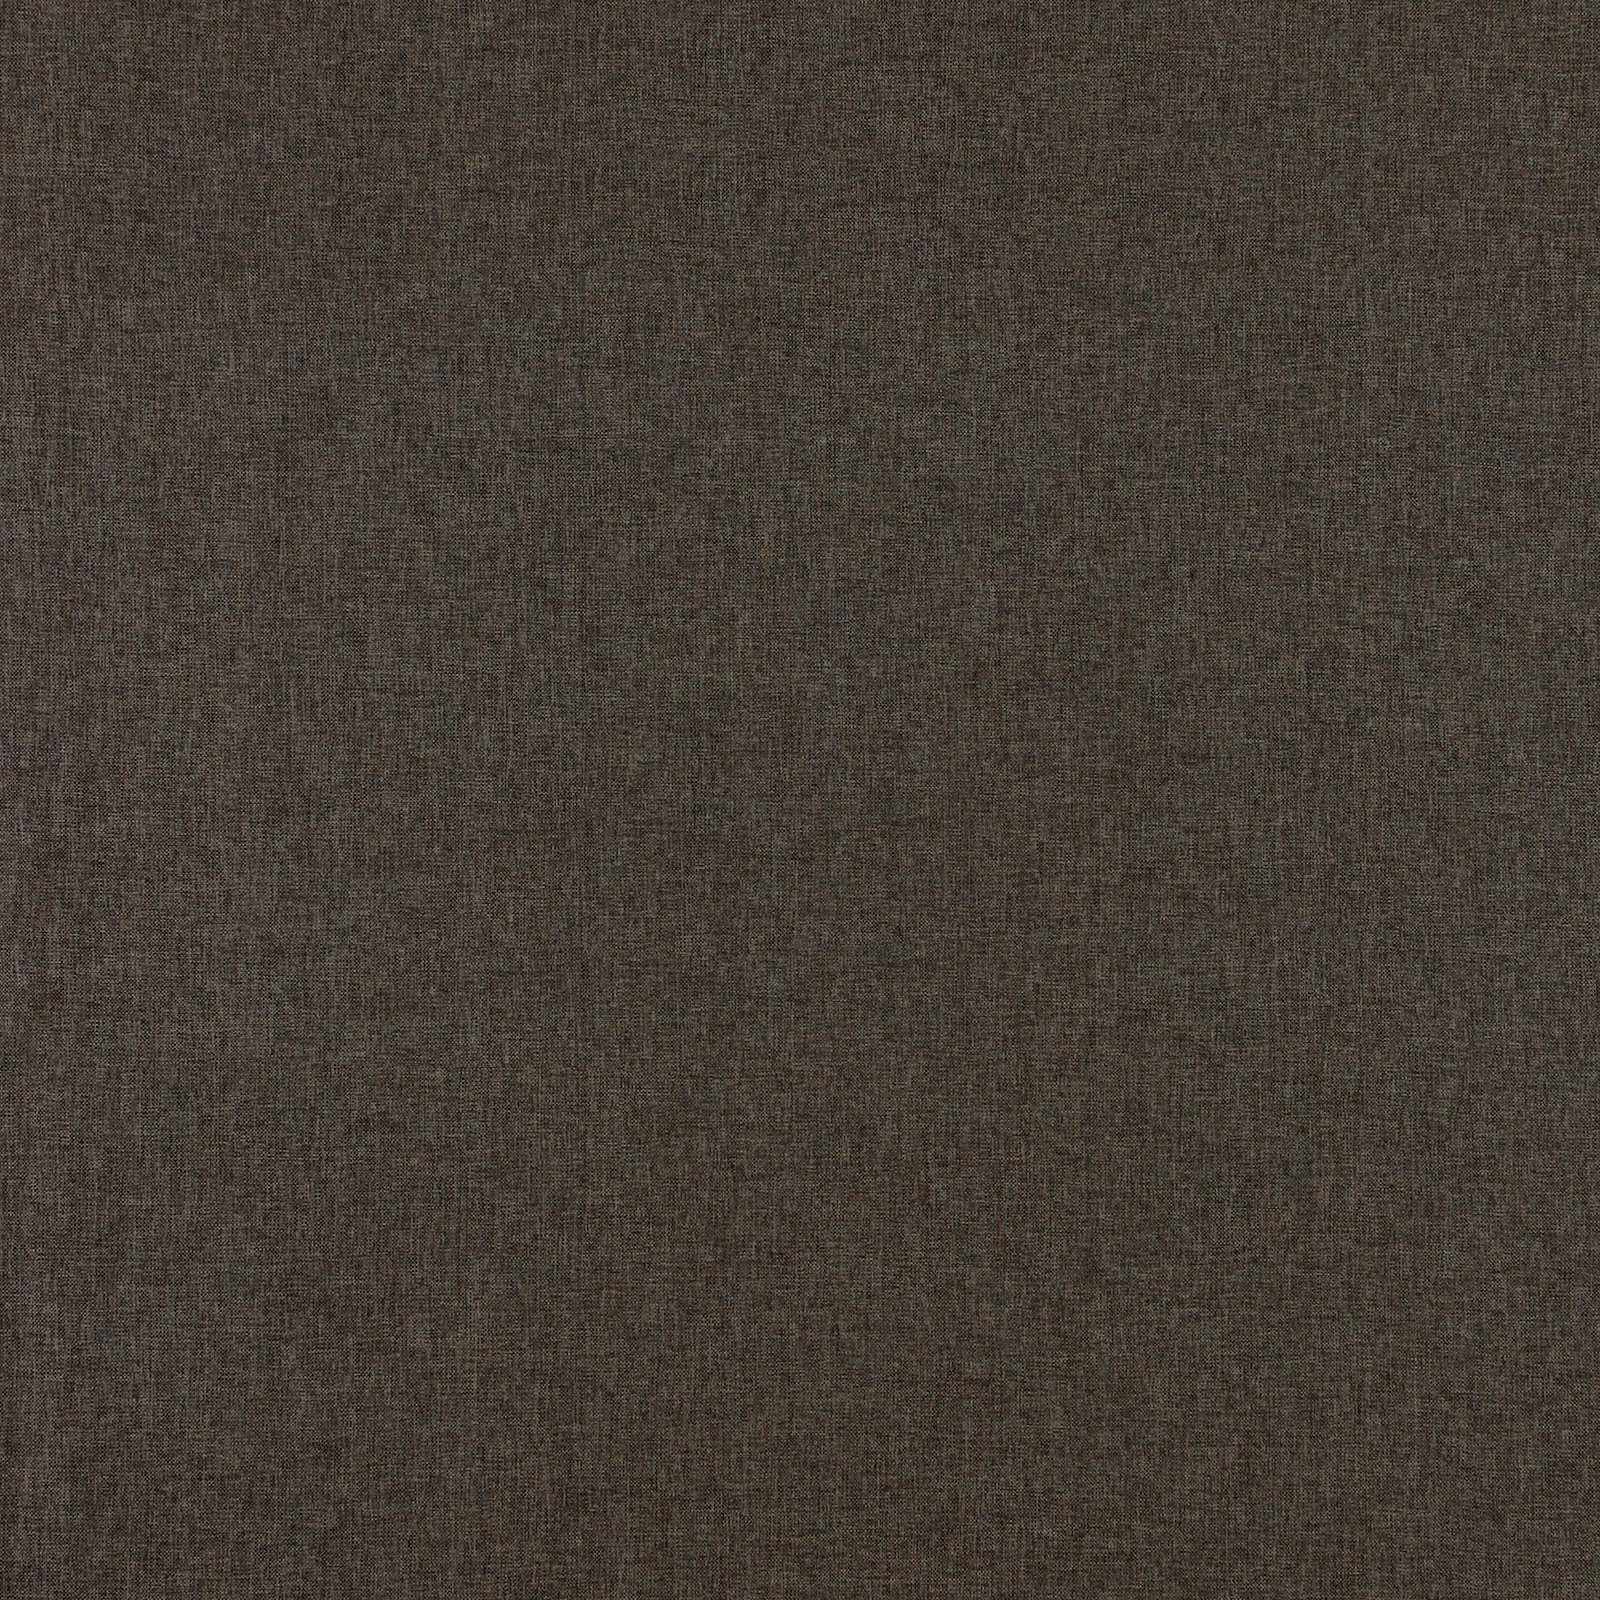 Upholstery texture brown/grey 822315_pack_sp